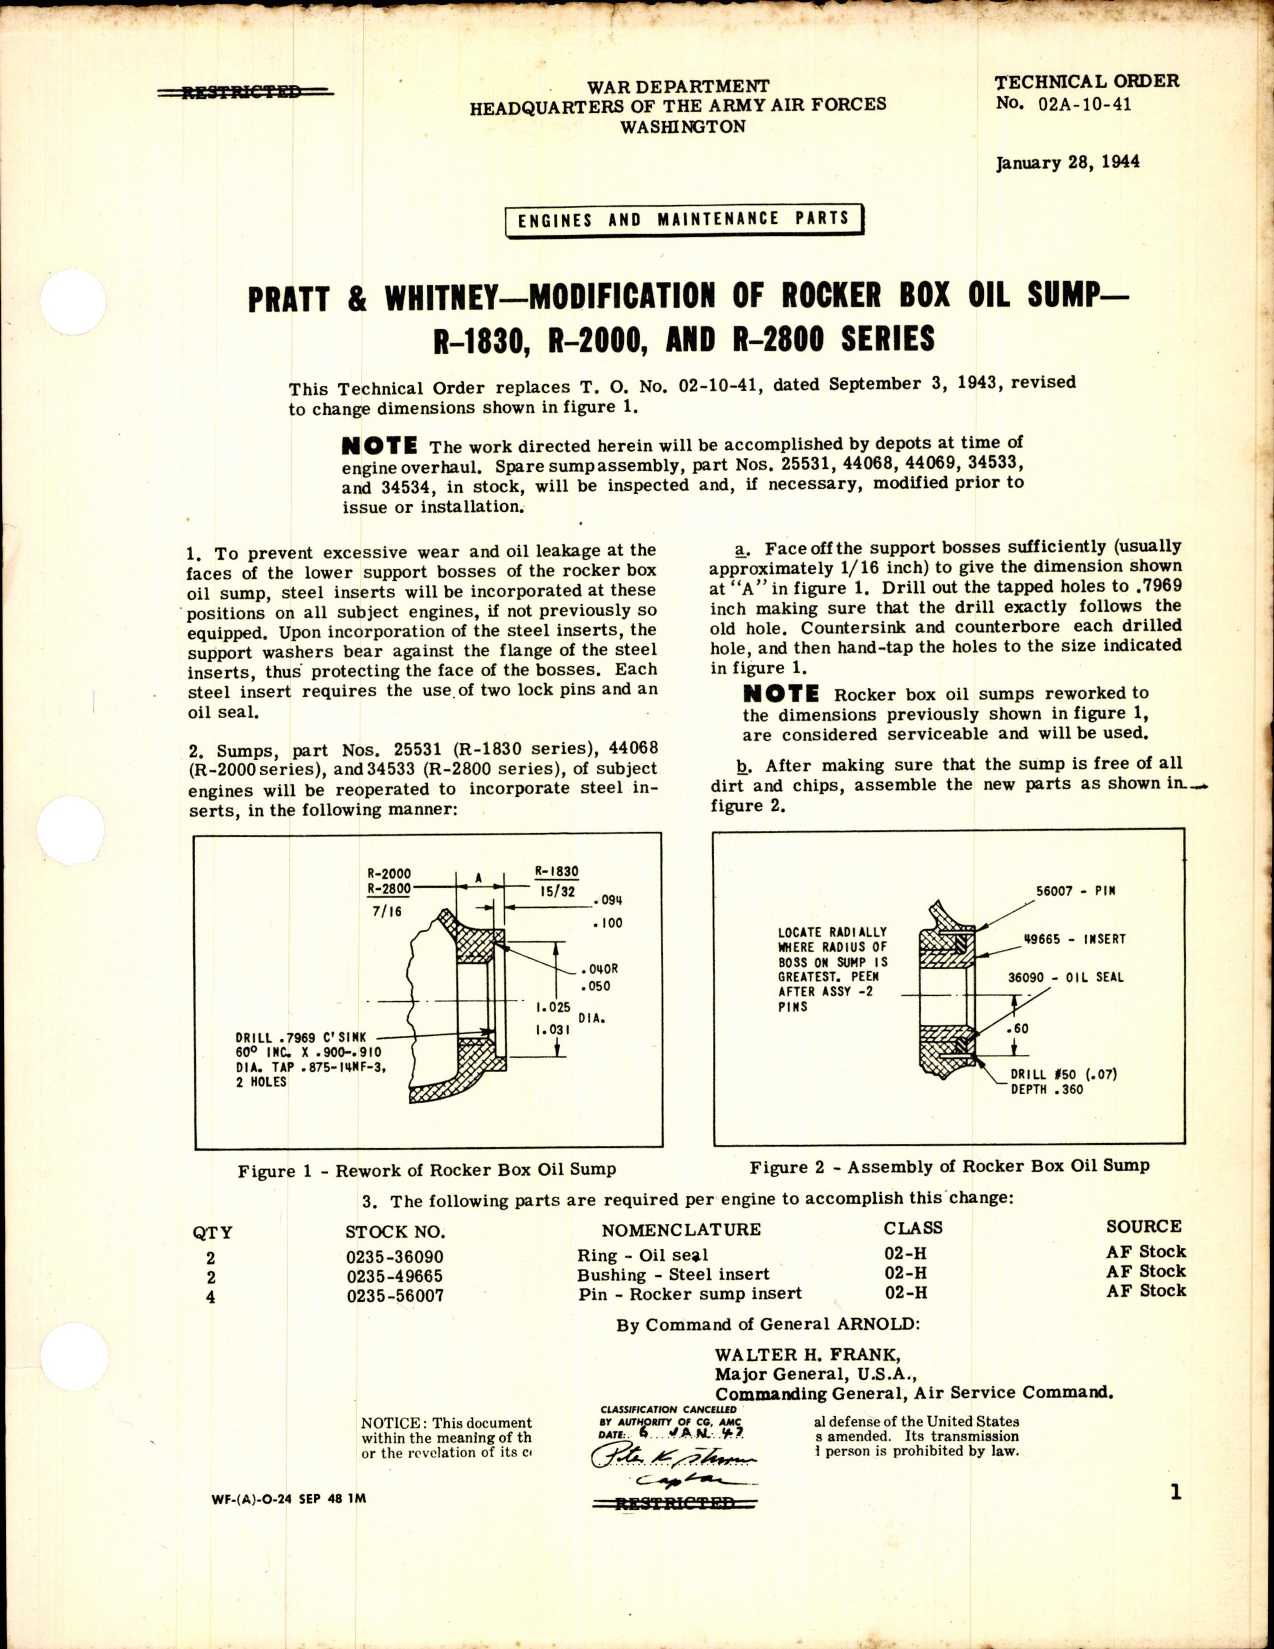 Sample page 1 from AirCorps Library document: Modification of Rocker Box Oil Sump for R-1830, R-2000 & R-2800